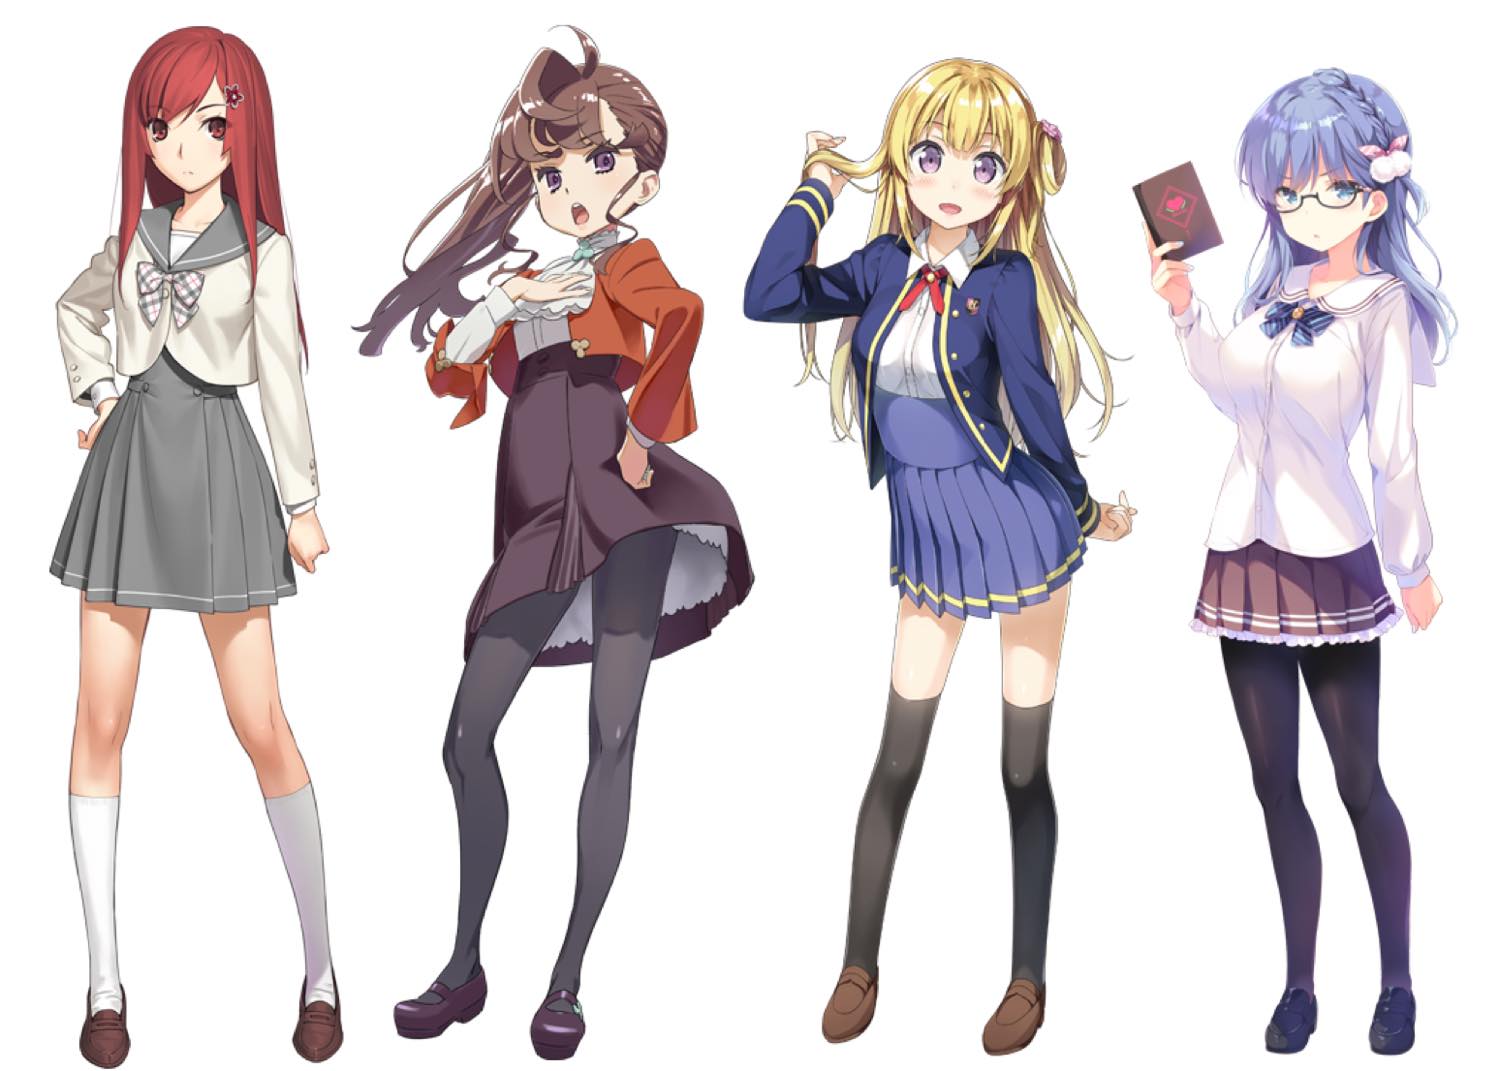 First 4 of 8 Character Designs for Yasushi Akimoto-Produced Digital Idol Project Revealed!